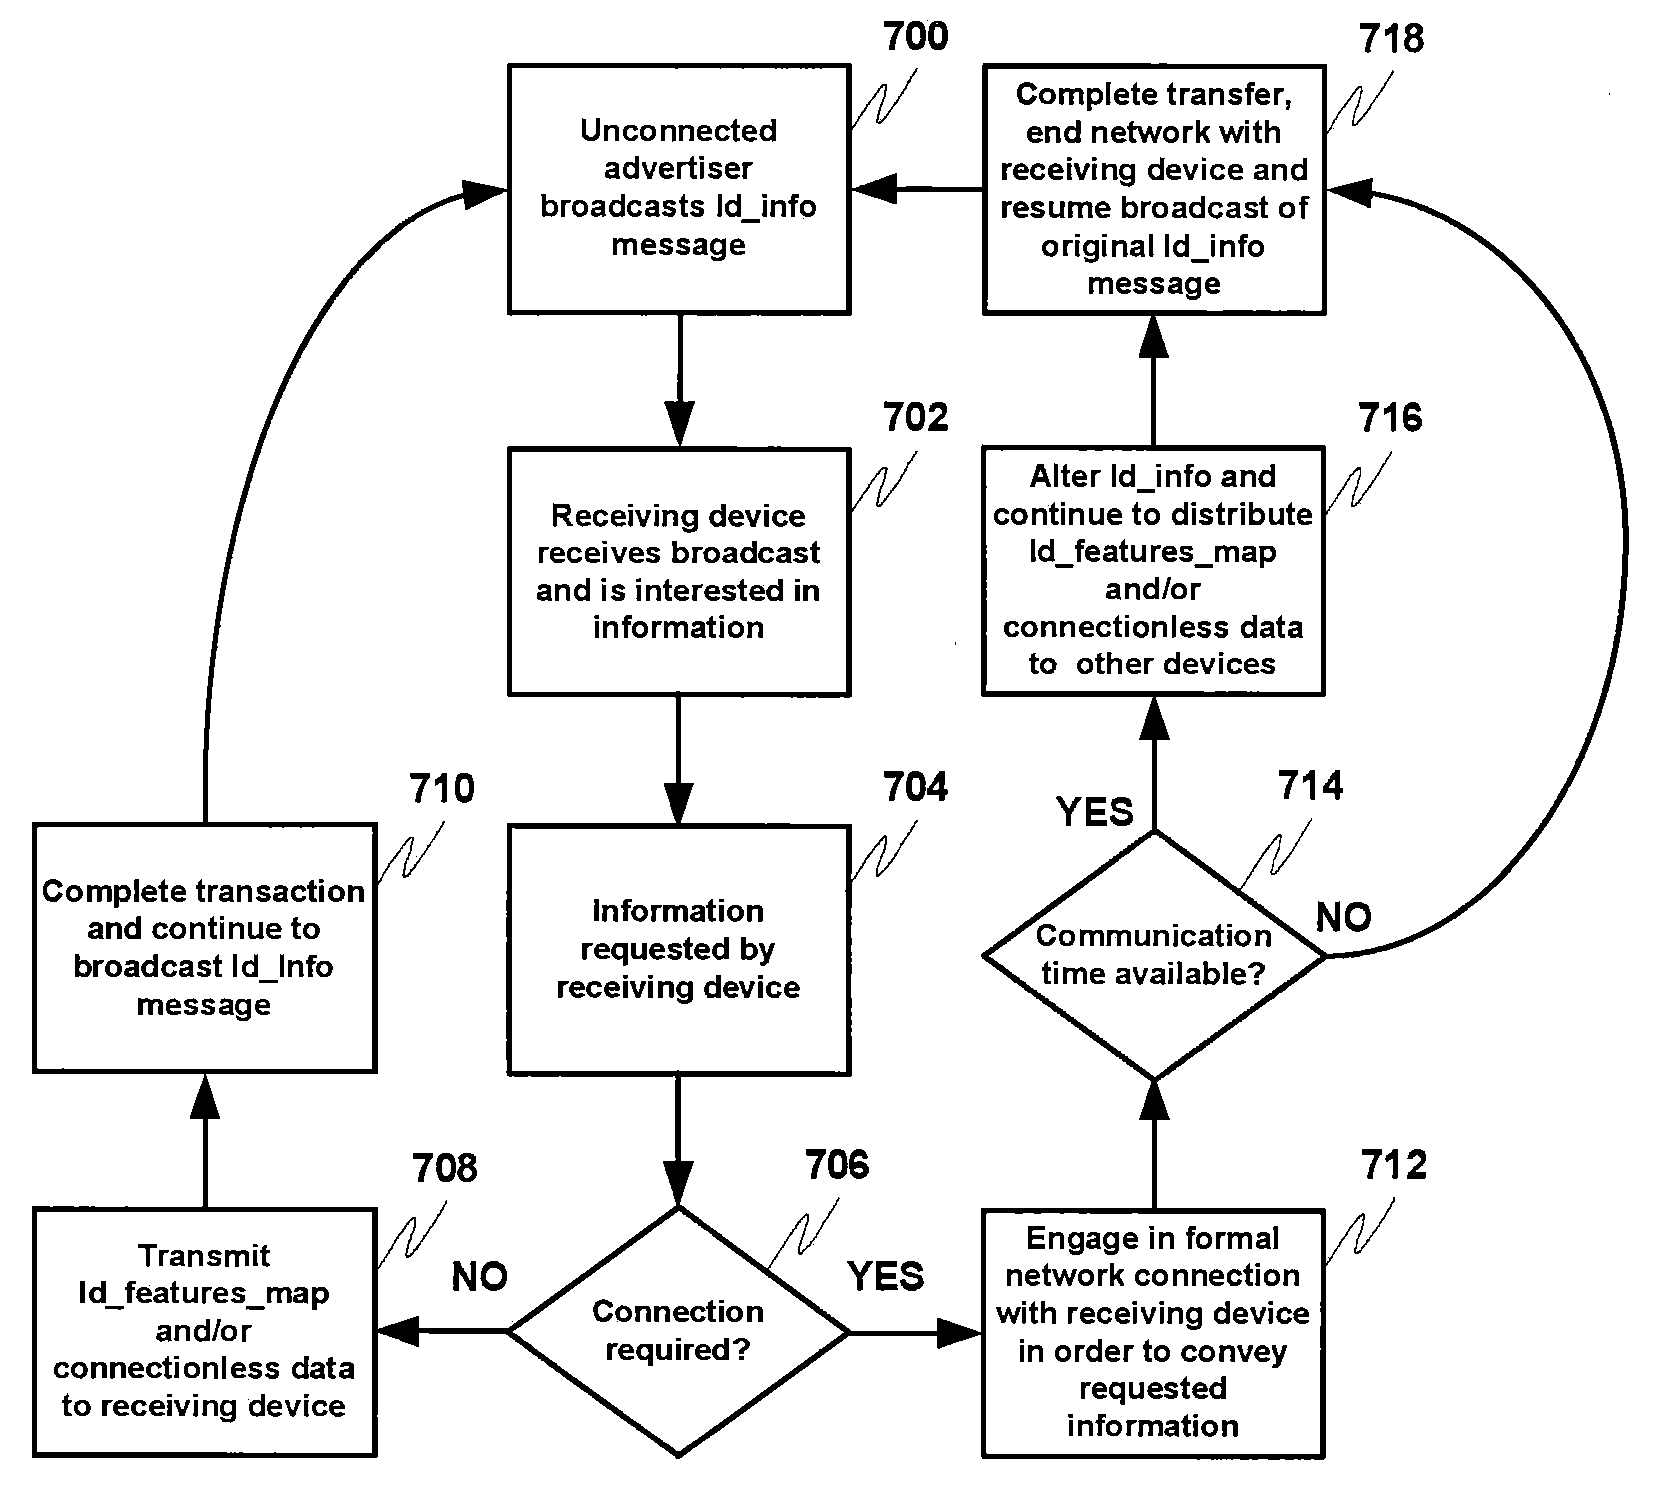 Connectionless information transfer from advertising device